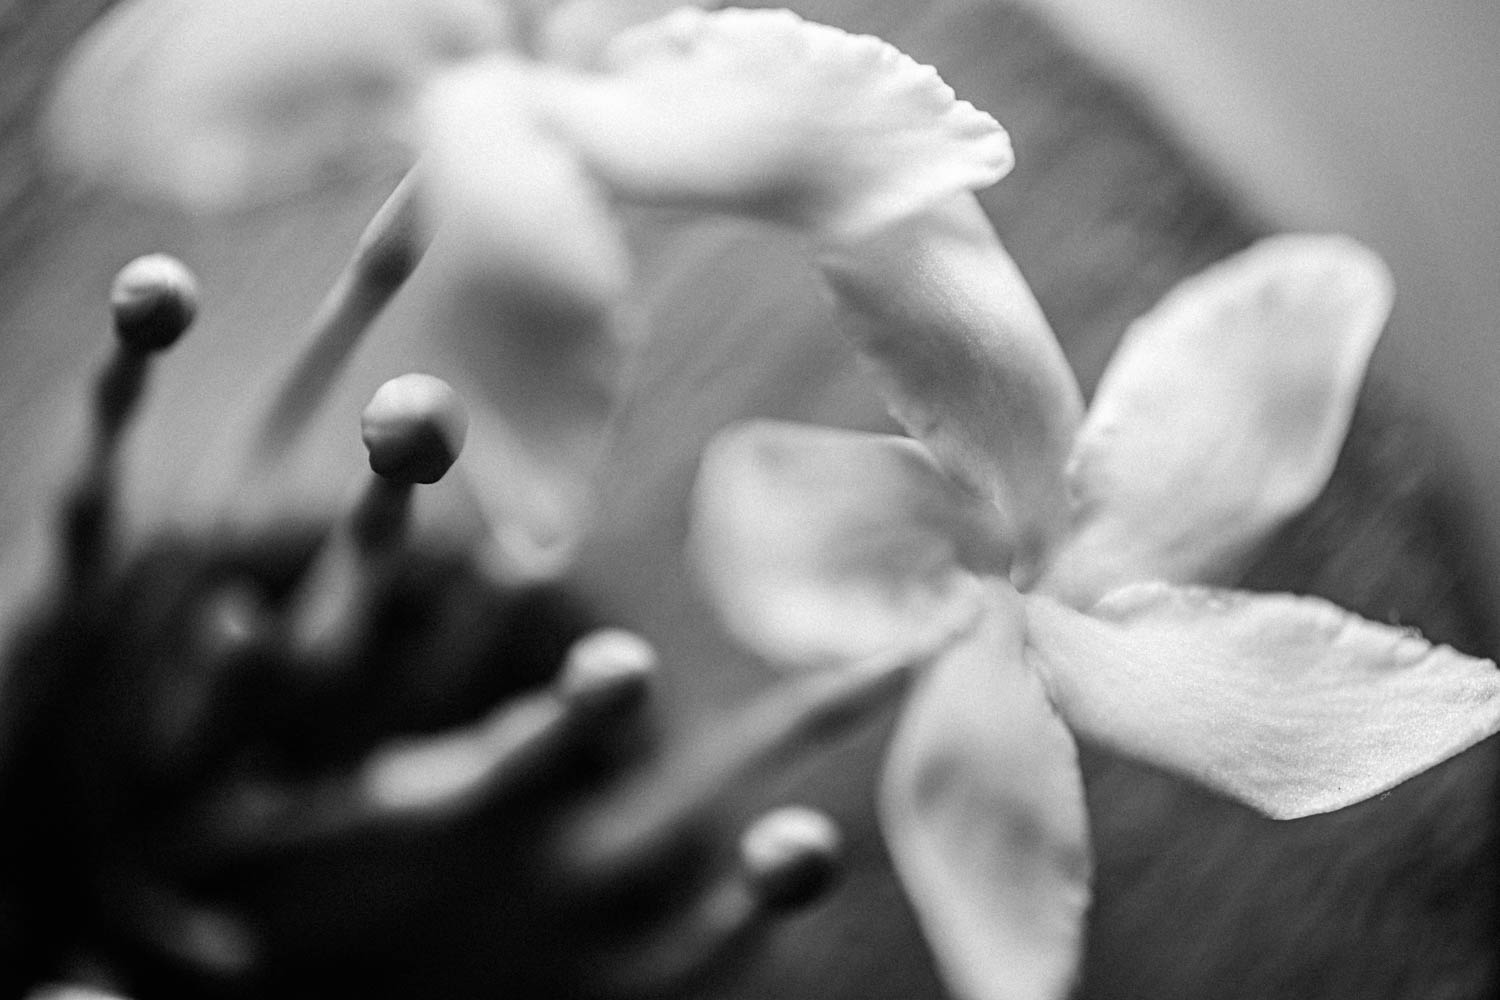 Black and white image of flowers taken with a macro lens